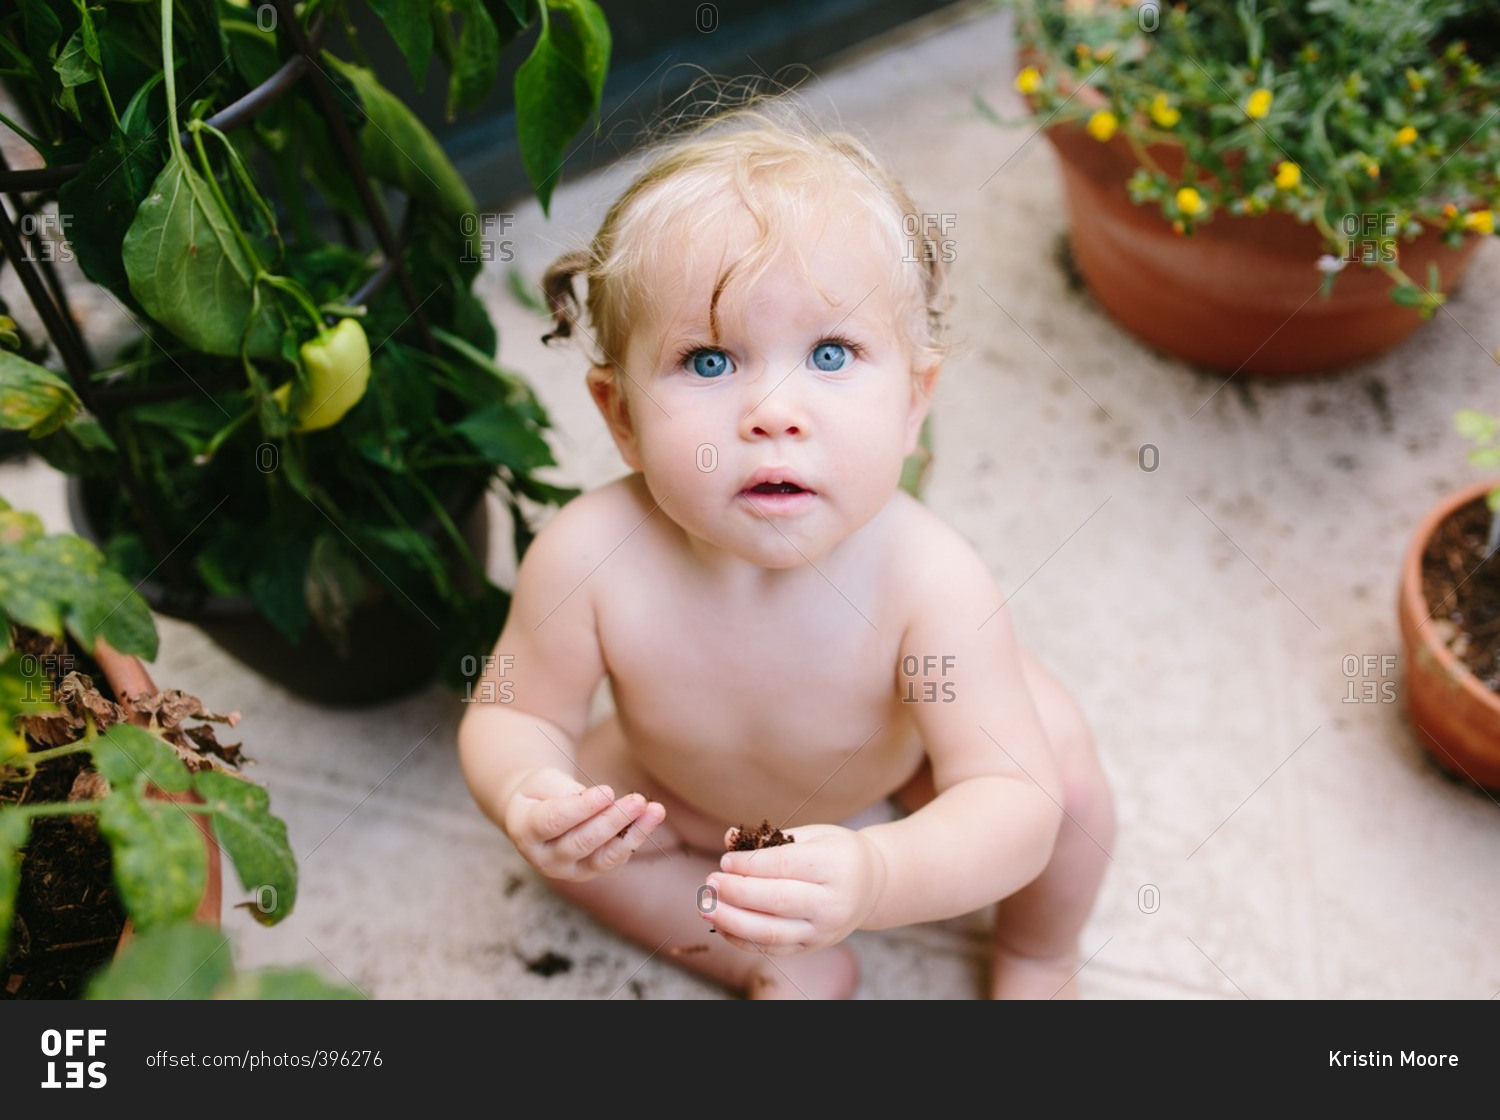 Elevated view of a toddler girl playing in dirt stock photo - OFFSET